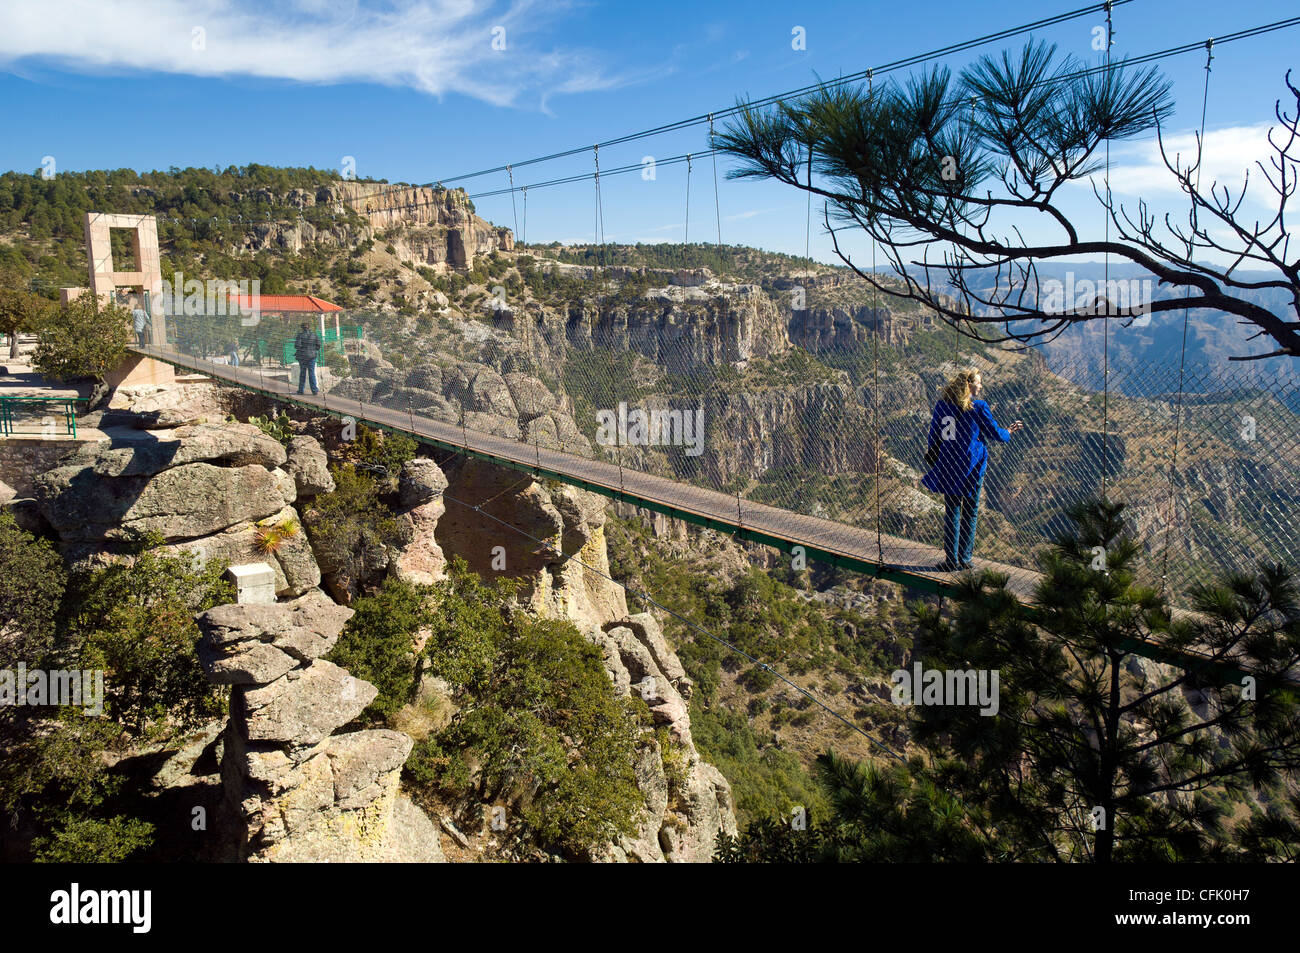 Suspension bridge and viewpoint overlooking Copper Canyon at Divisadero, Chihuahua, Mexico. Stock Photo